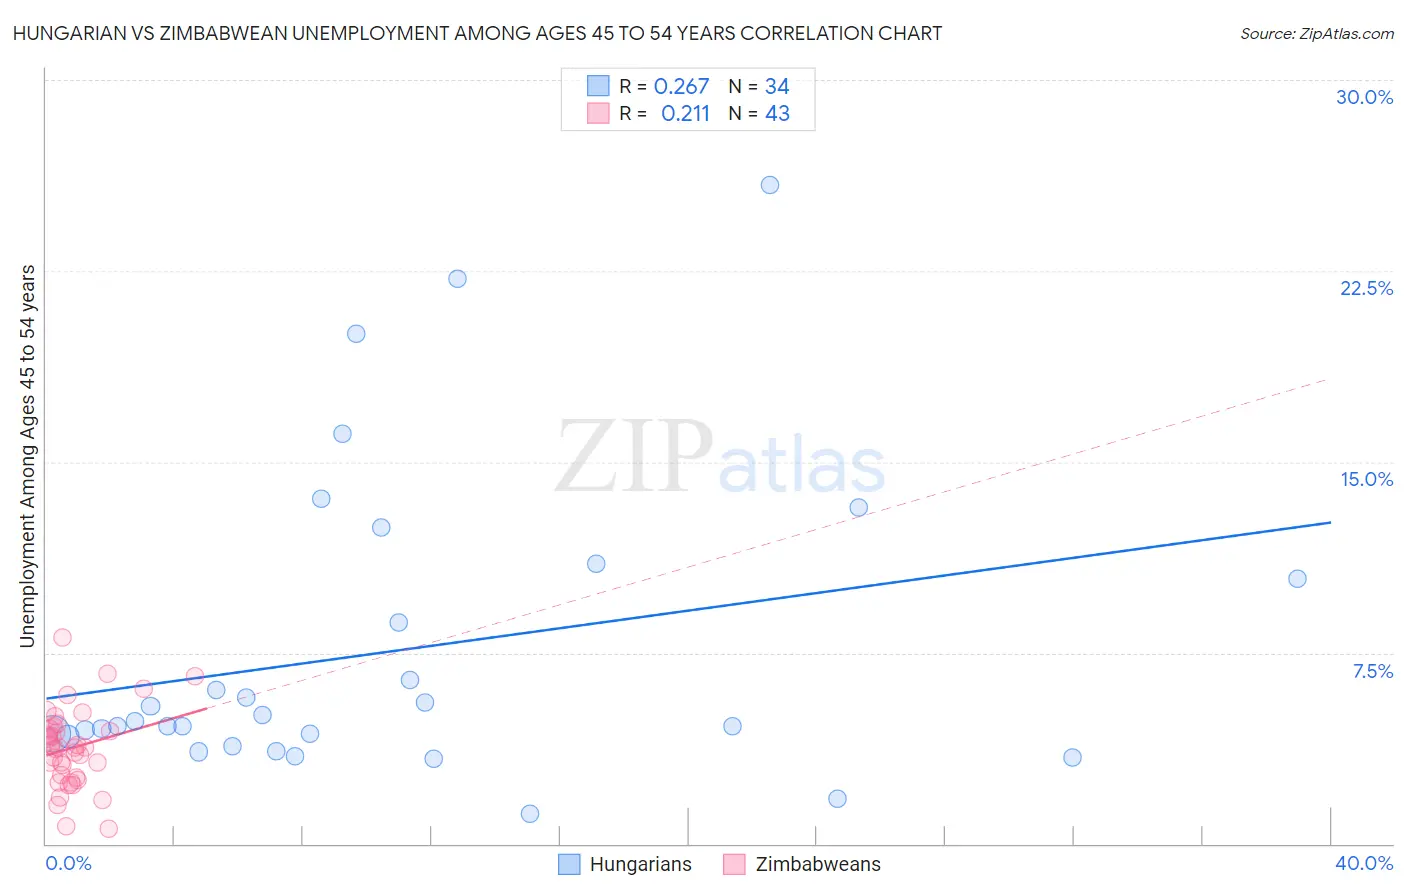 Hungarian vs Zimbabwean Unemployment Among Ages 45 to 54 years